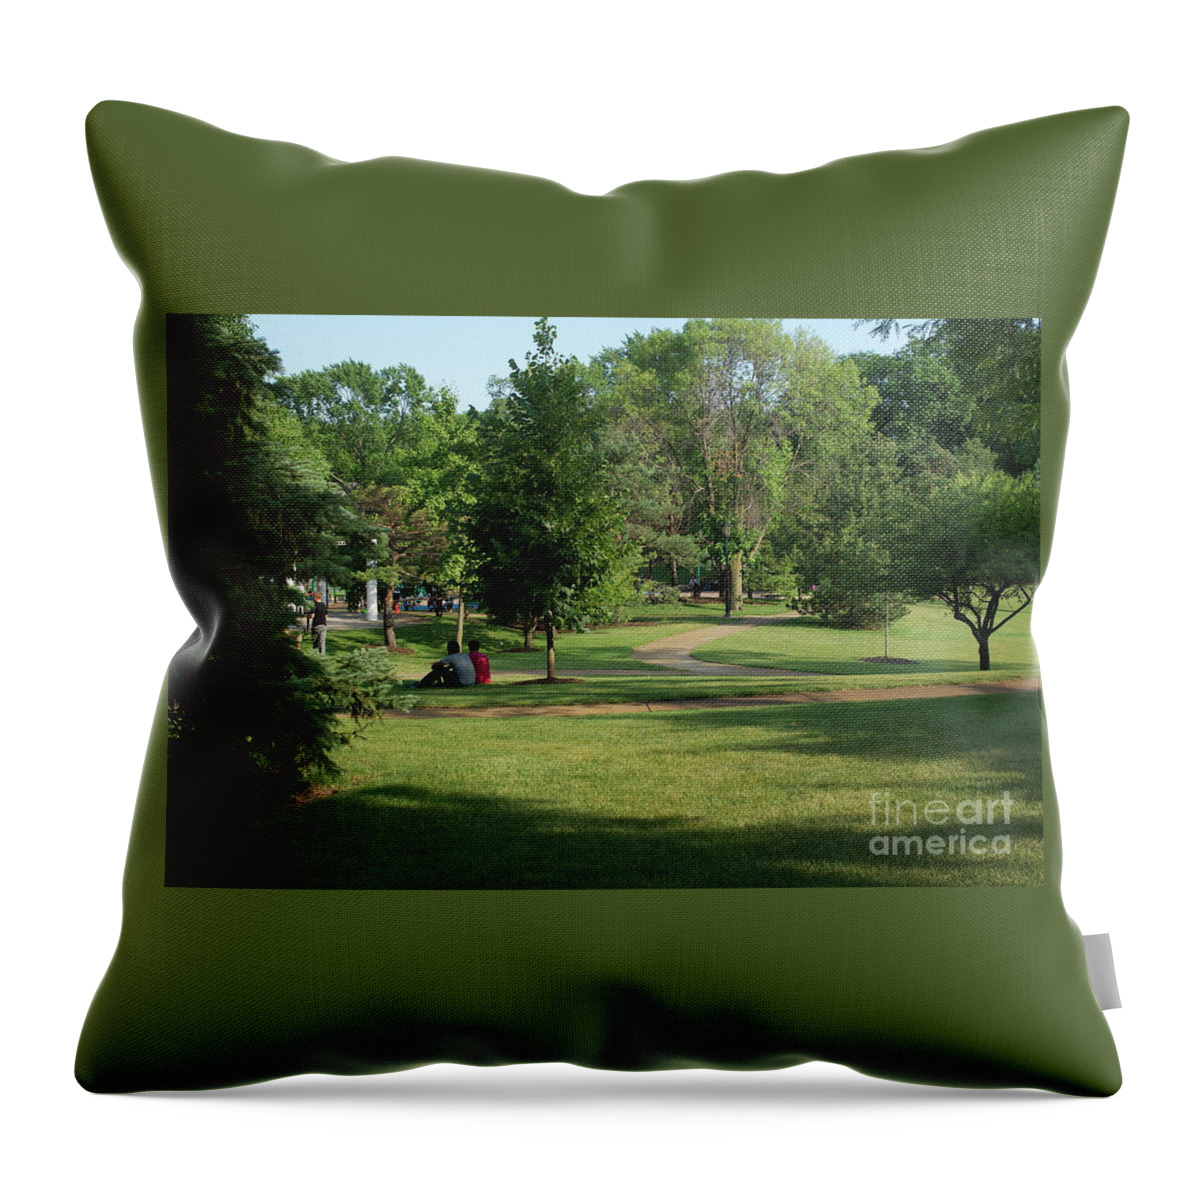 Recreation Throw Pillow featuring the photograph Quality Time by Frank J Casella